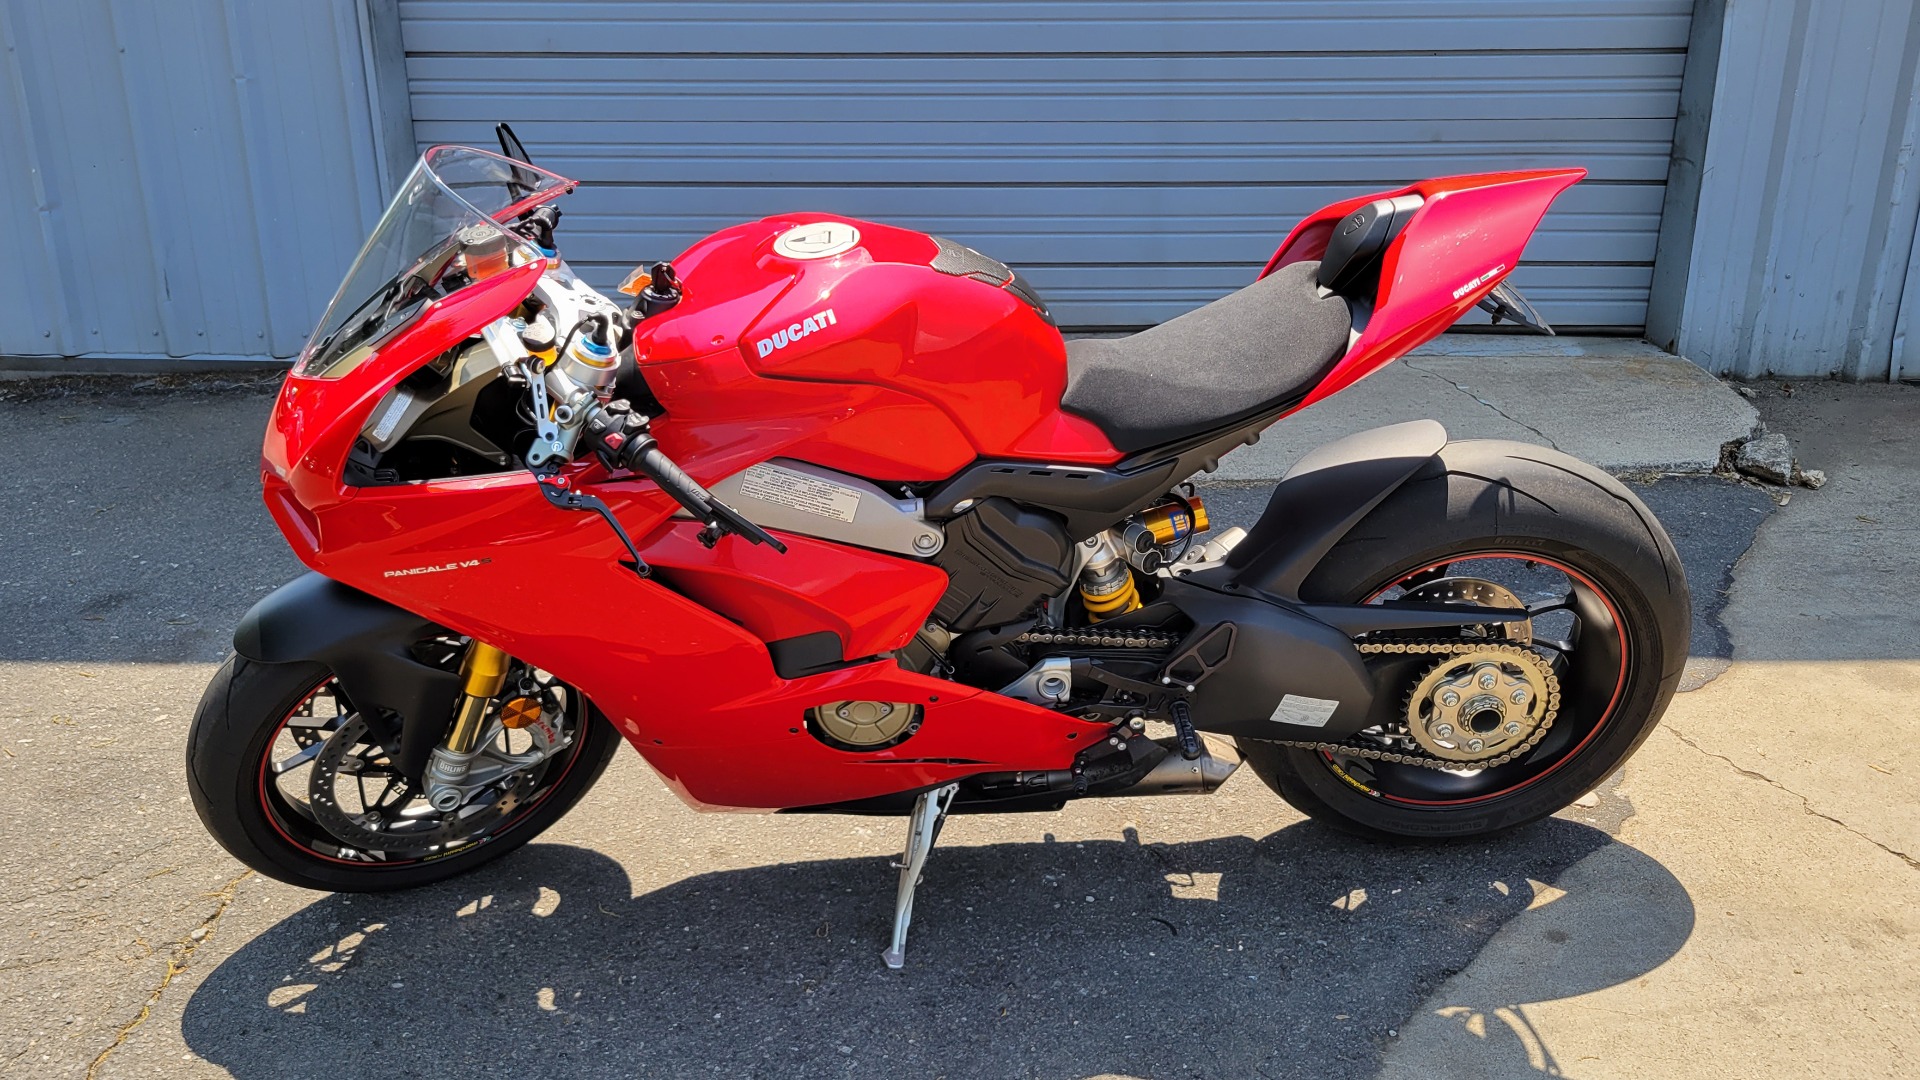 Used 2018 Ducati PANIGALE V4S / 1103CC 214HP / FUEL INJECTED / LOW MILES for sale Sold at Formula Imports in Charlotte NC 28227 2